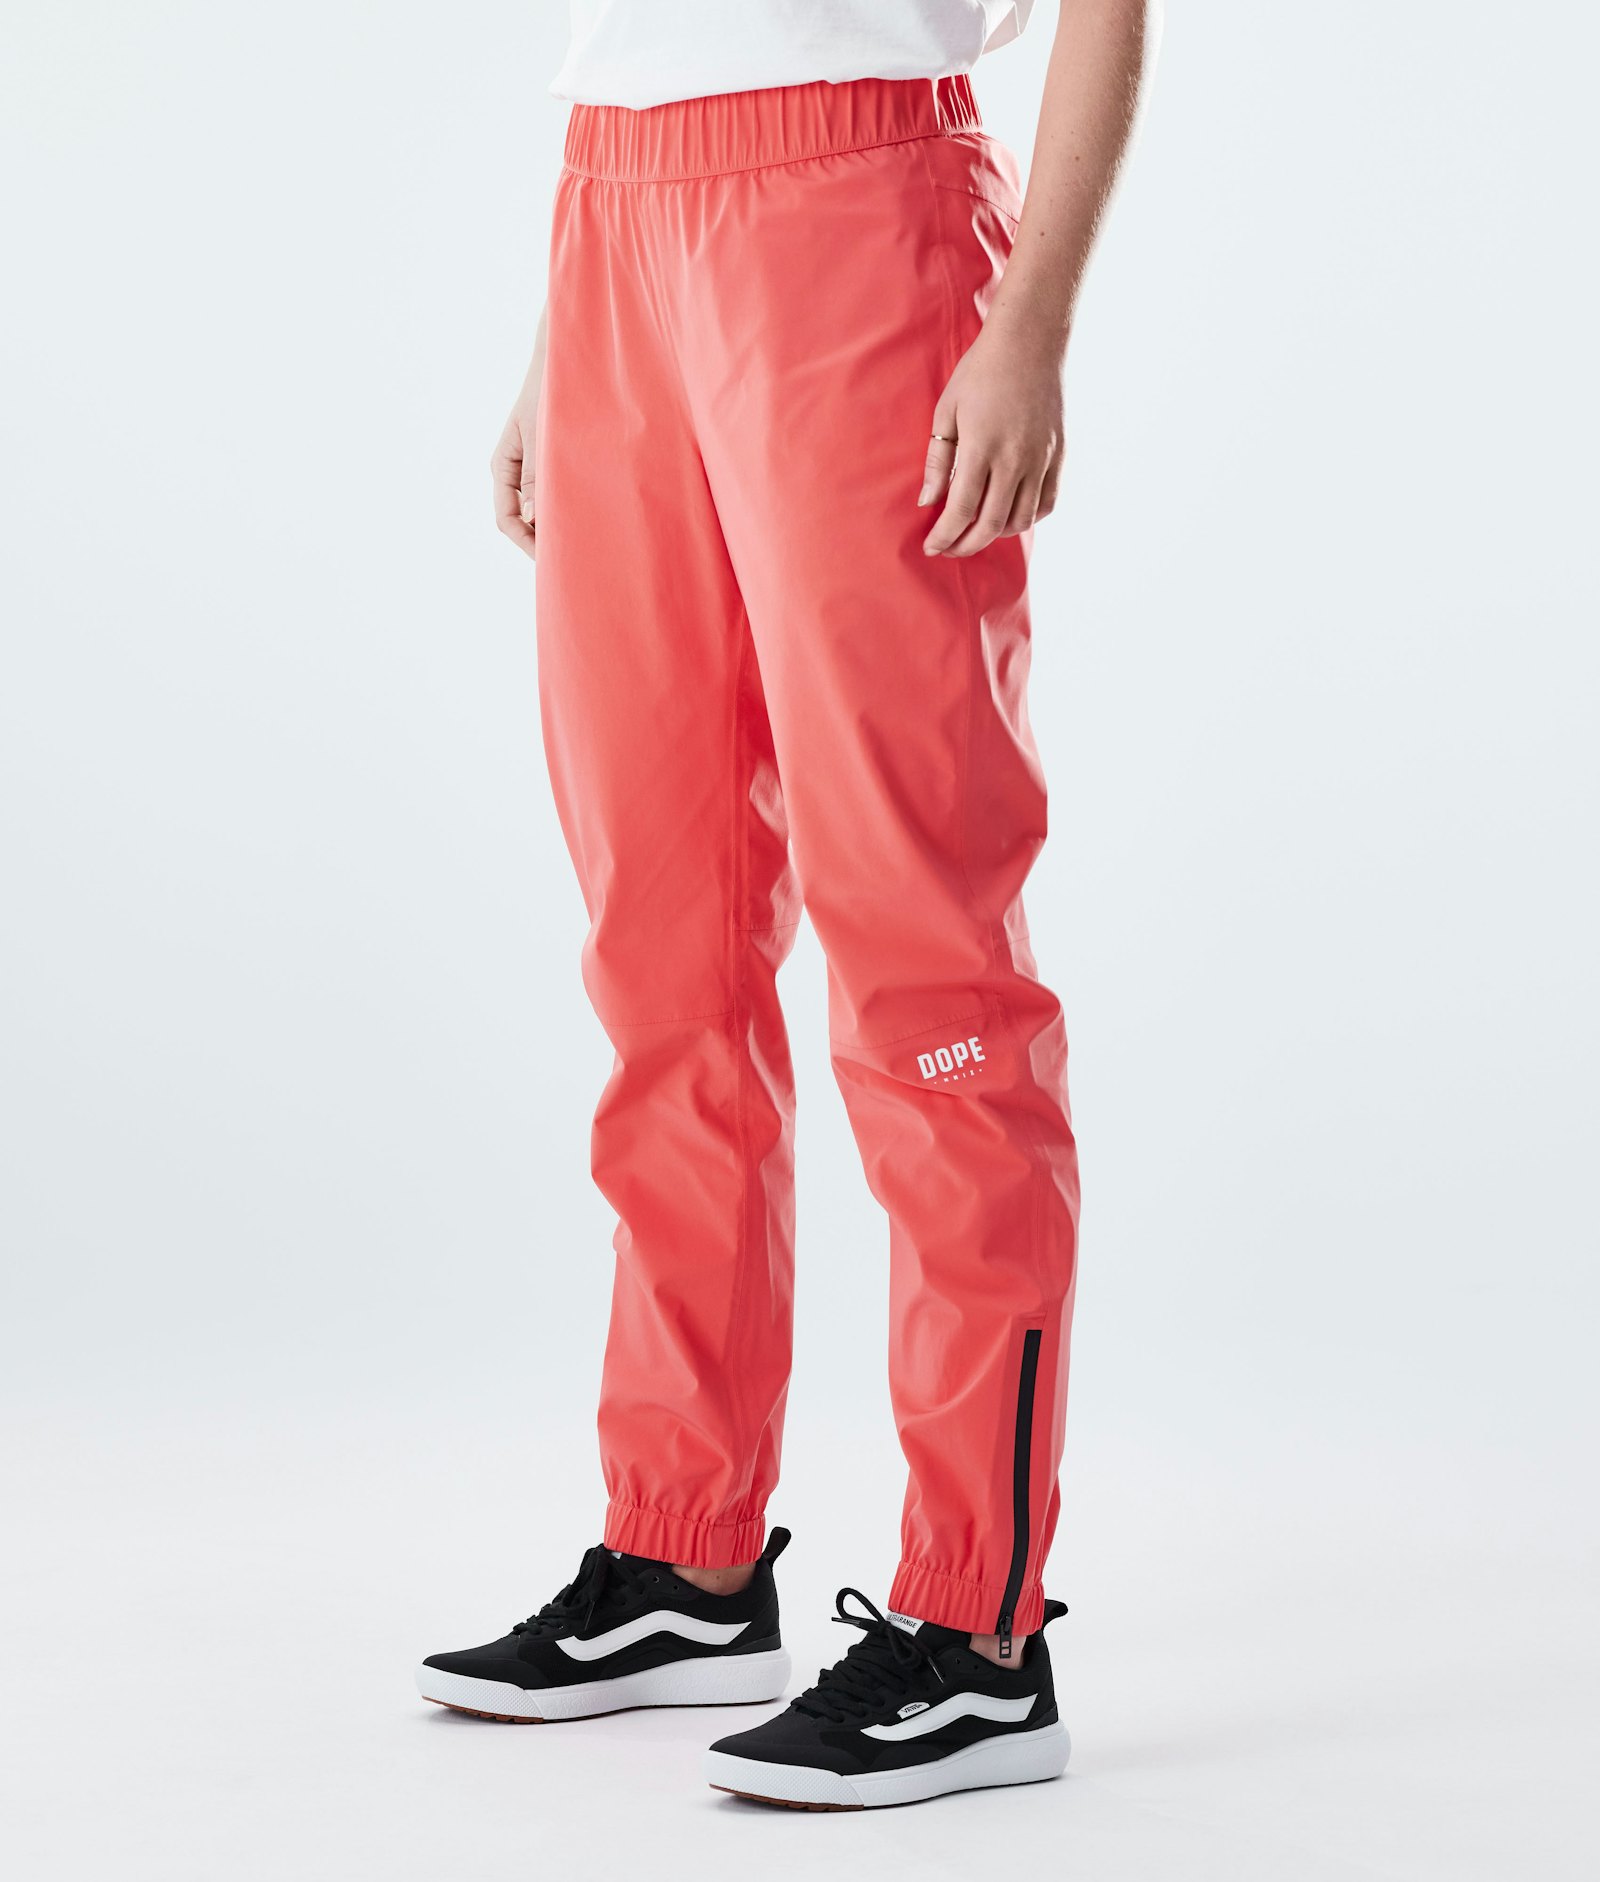 Dope Drizzard W Pantalones Impermeables Mujer Coral - Coral